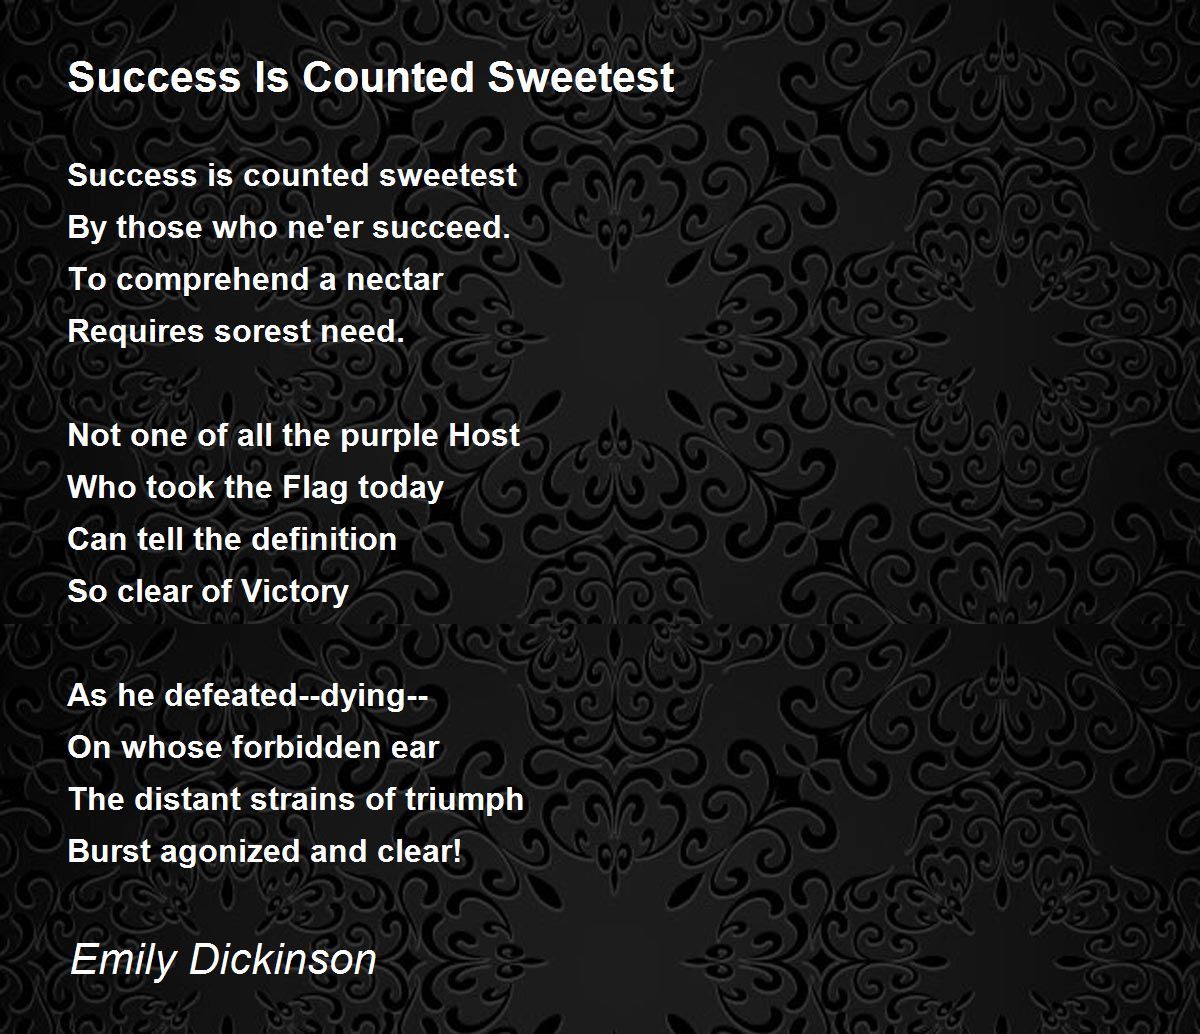 Success Is Counted Sweetest Poem by Emily Dickinson - Poem Hunter